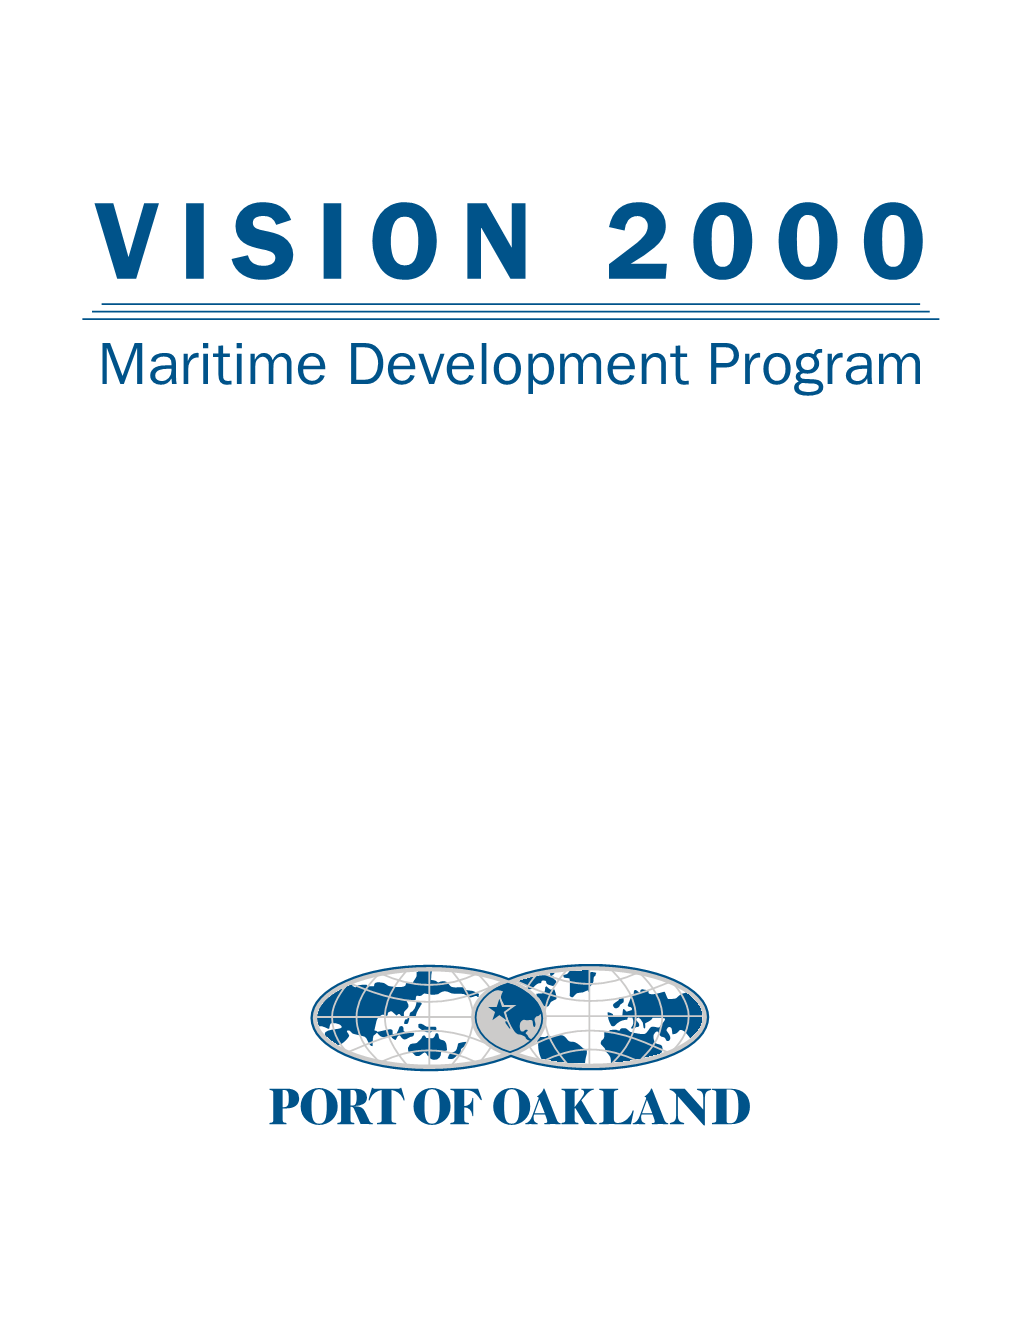 Vision 2000 Unique Partnership Through Which the Port Program Are Underway